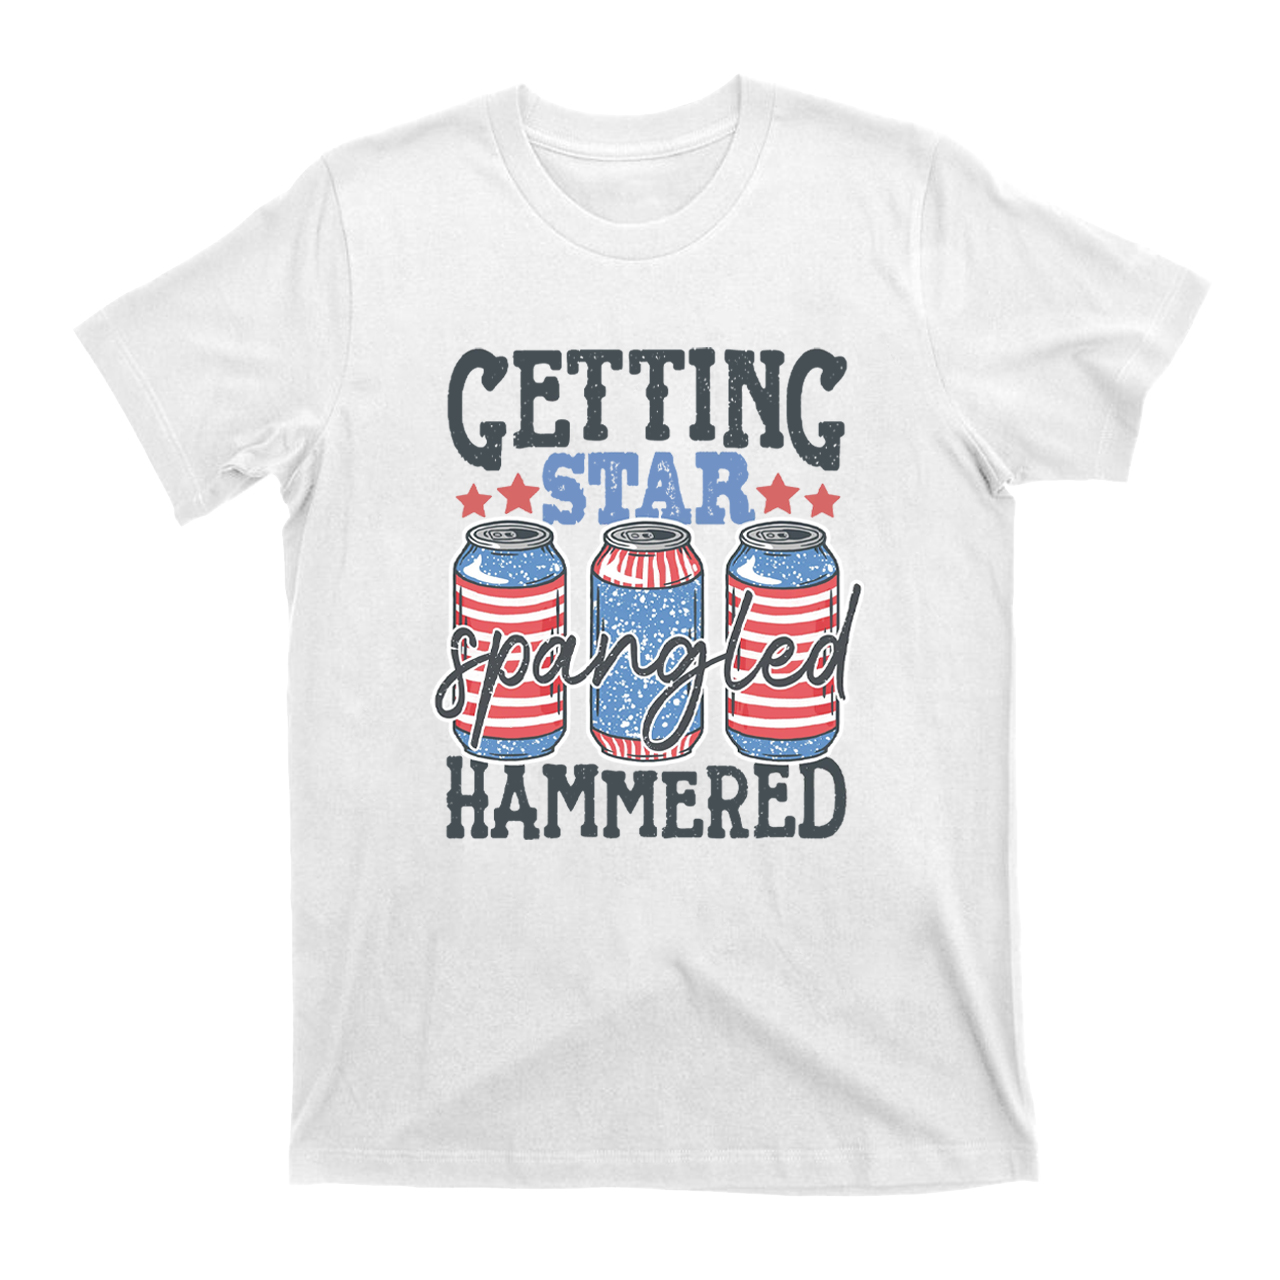 Getting Star Spangled Hammered T-Shirts